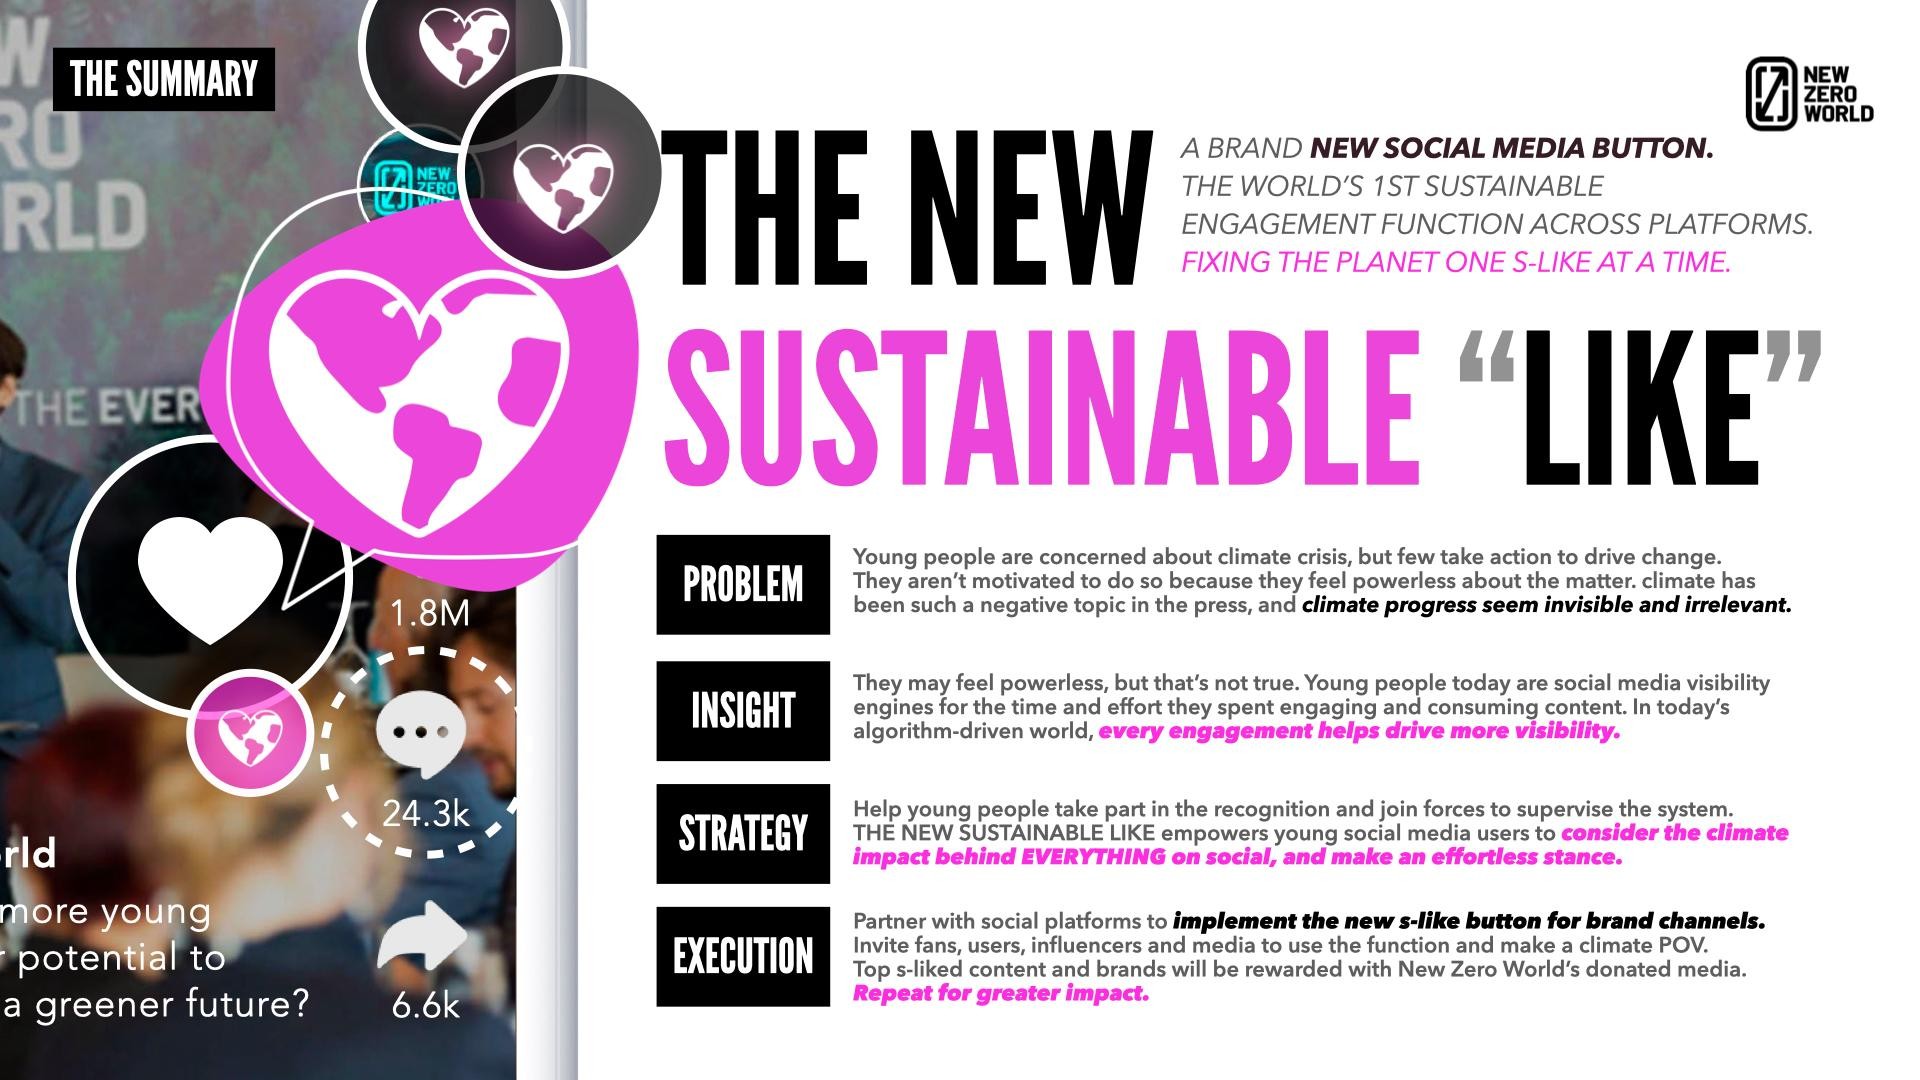 The Sustainable Like